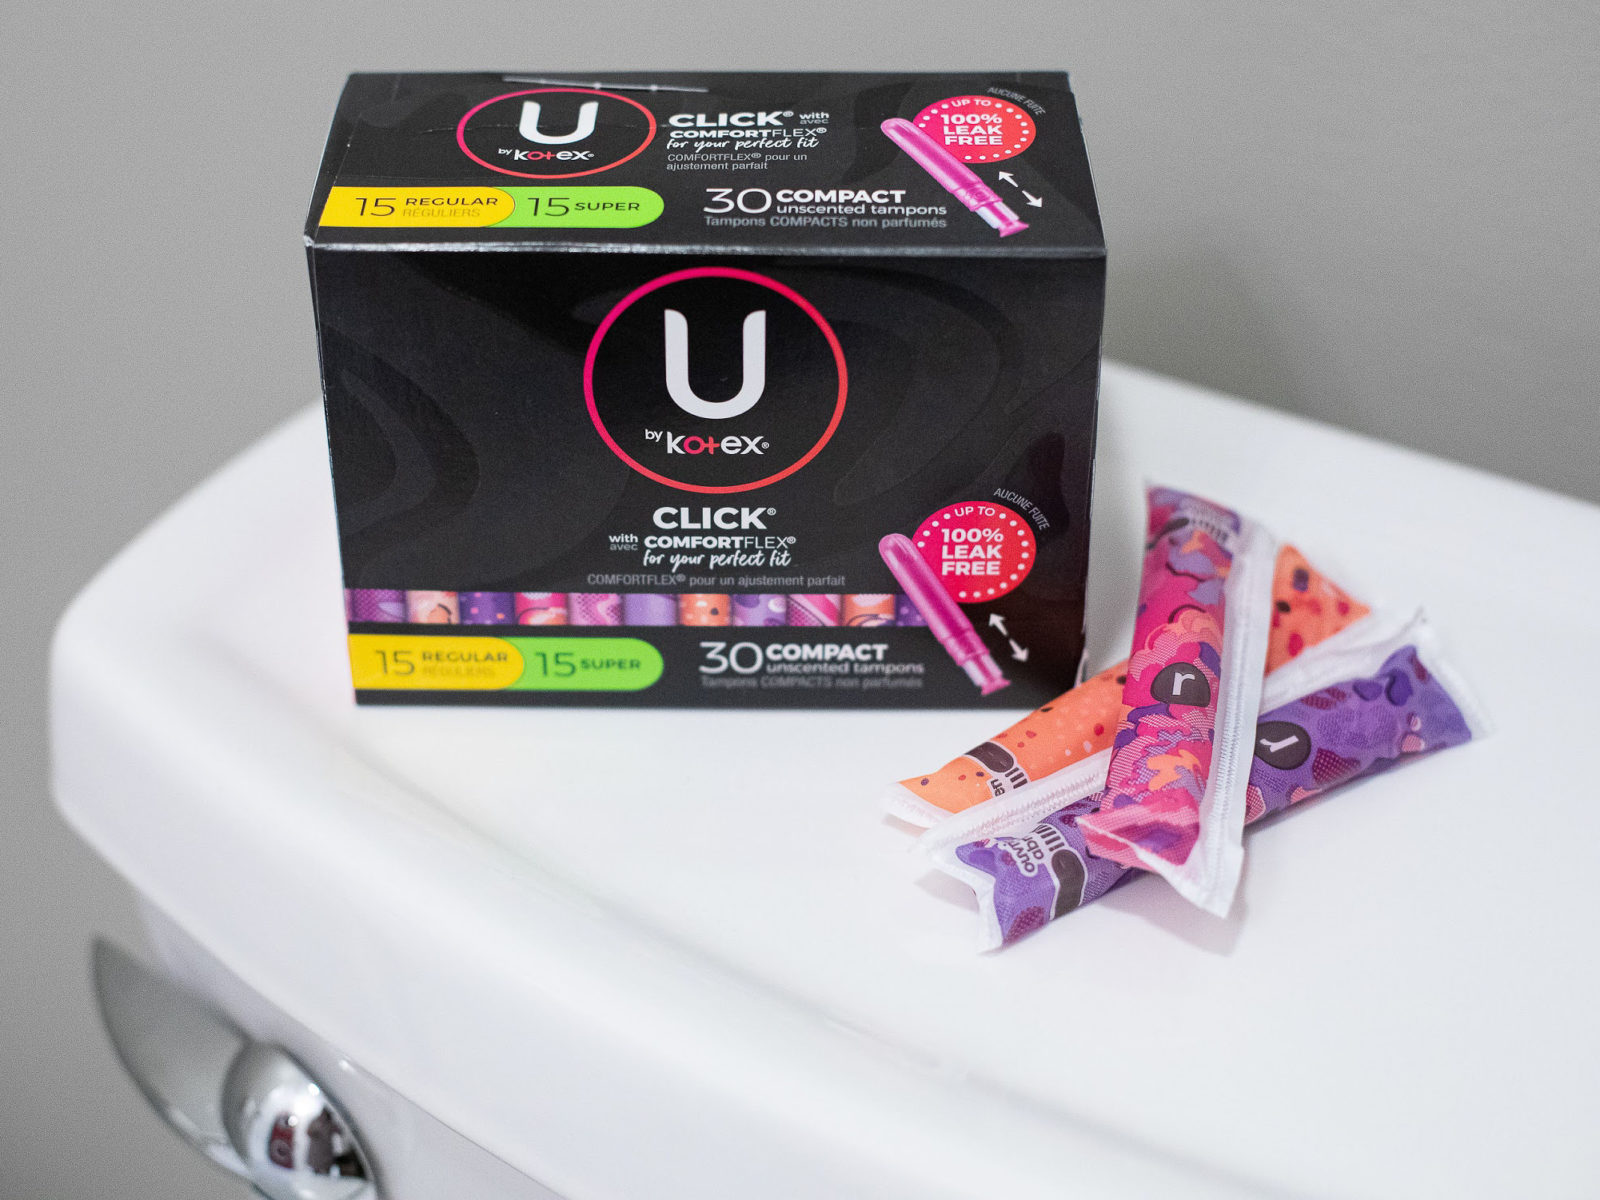 U by Kotex Products As Low As $1.34 At Publix